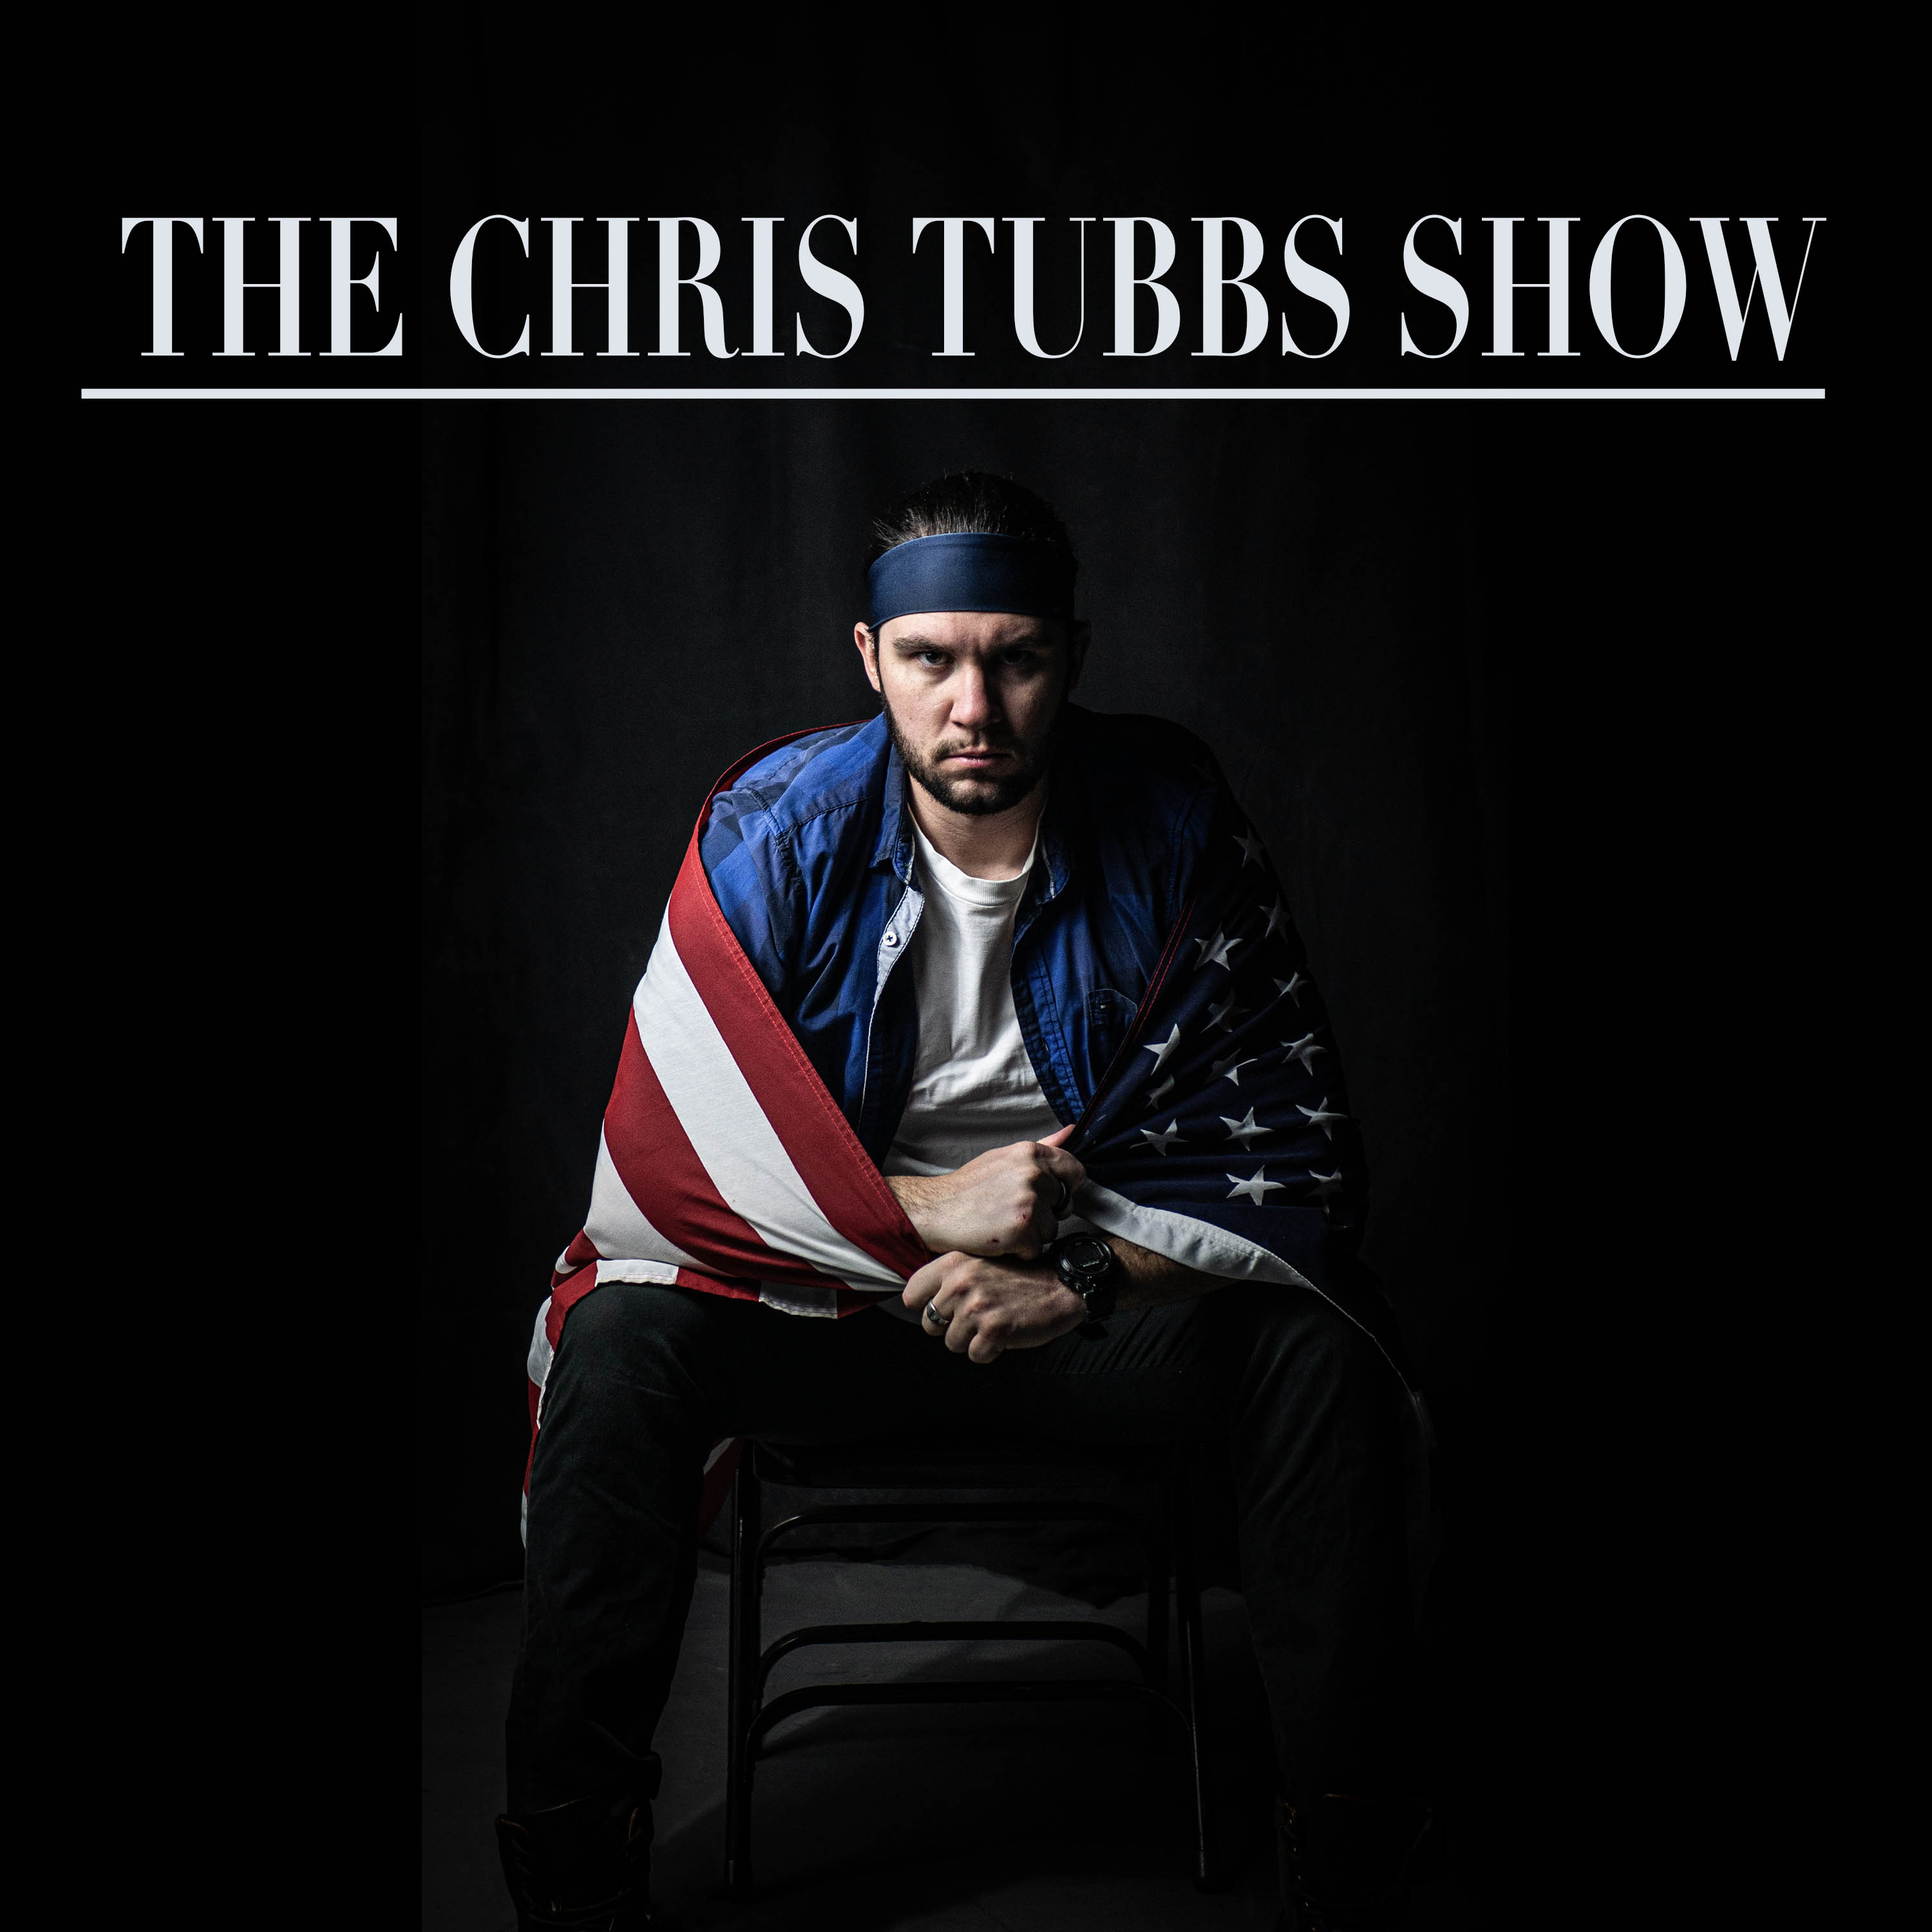 Artwork for The Chris Tubbs Show